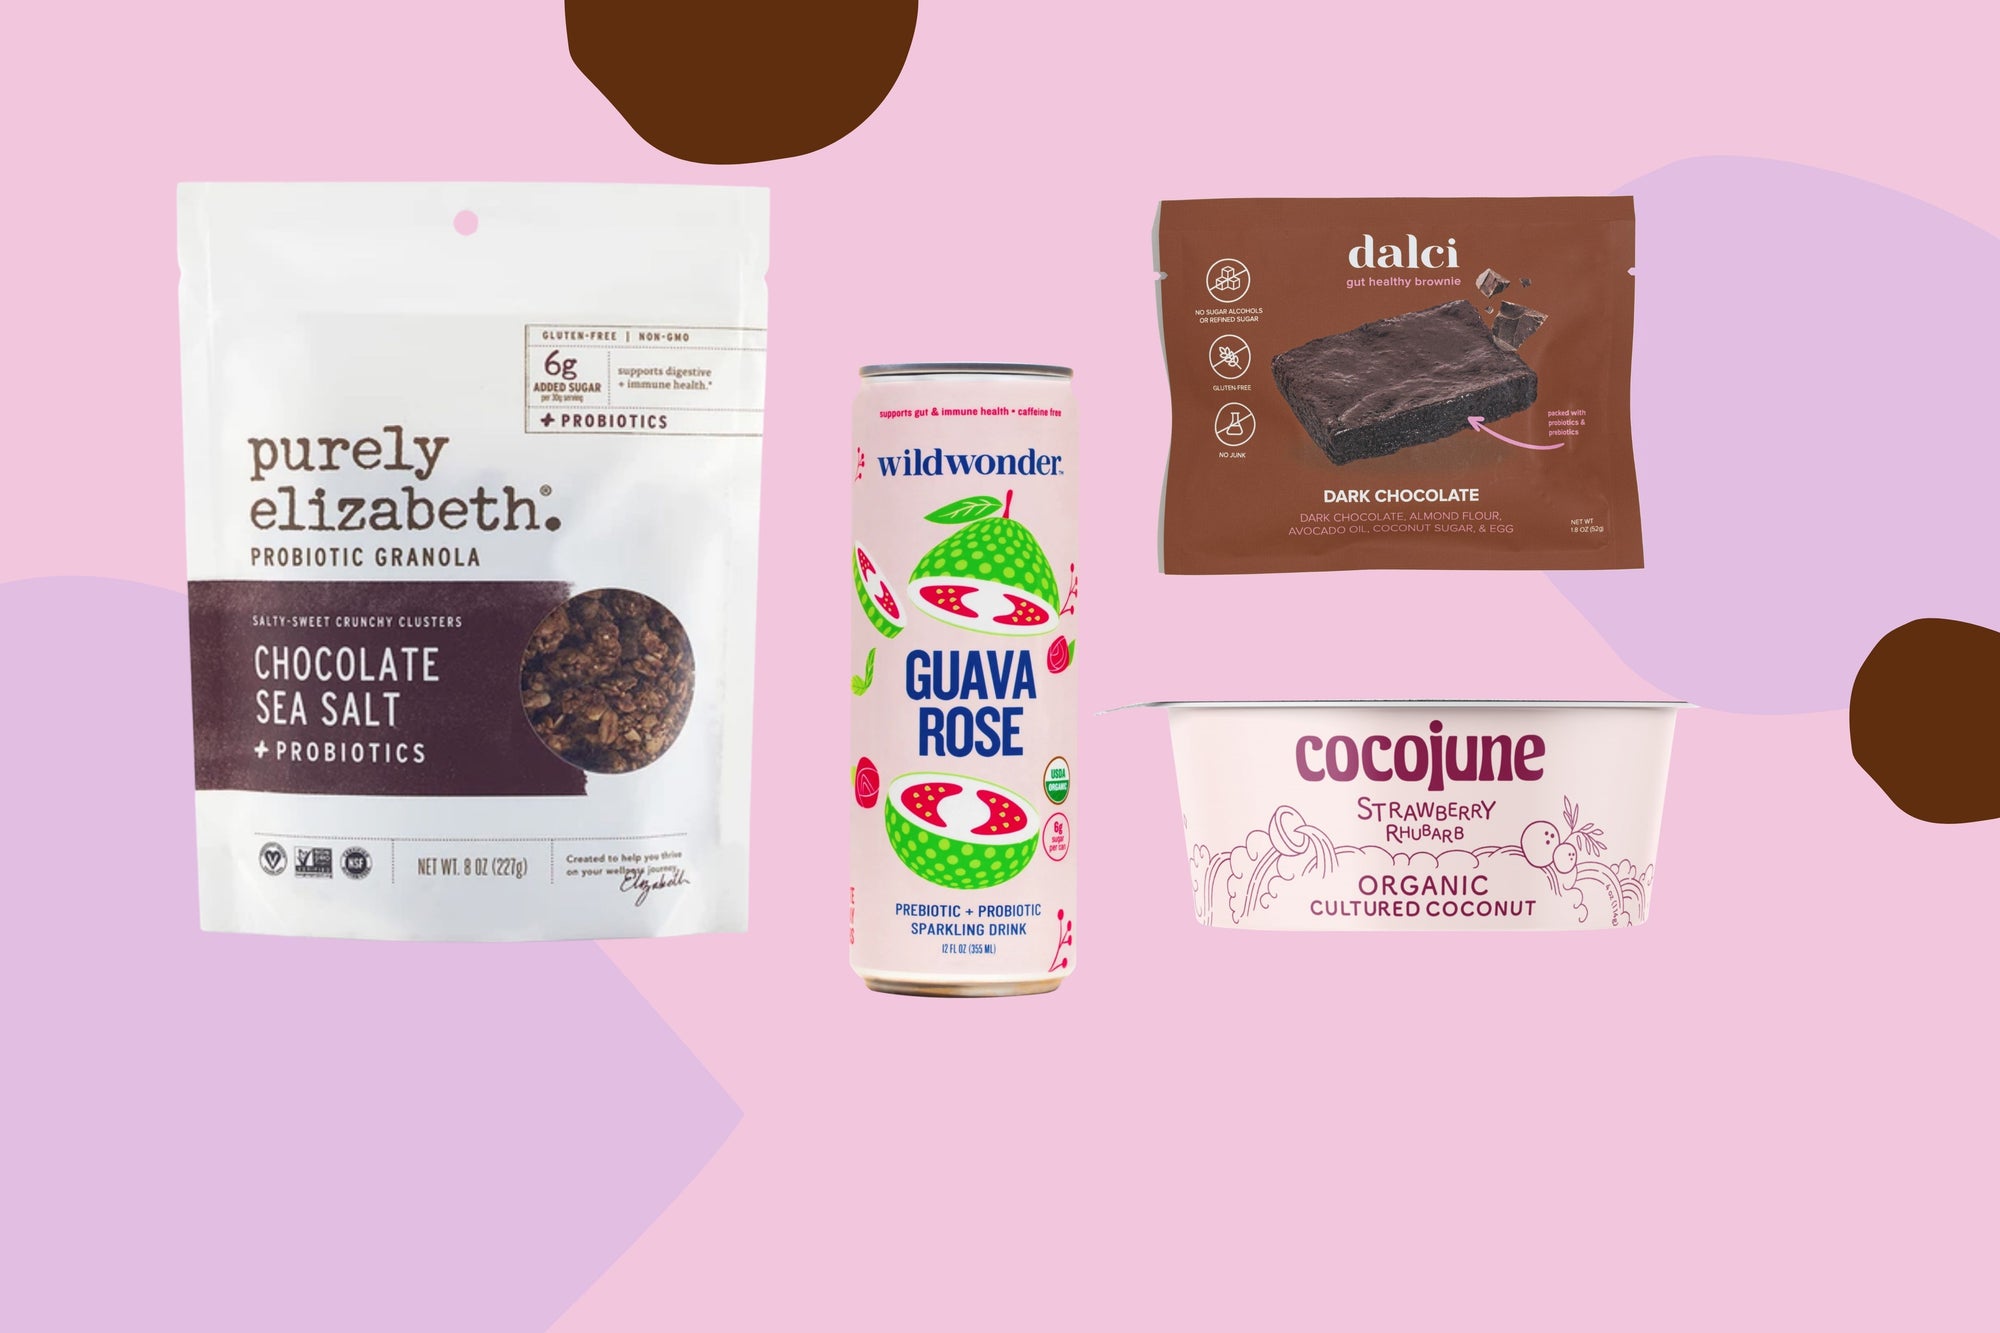 Top 8 Dairy Free Snack Options Rich in Probiotics